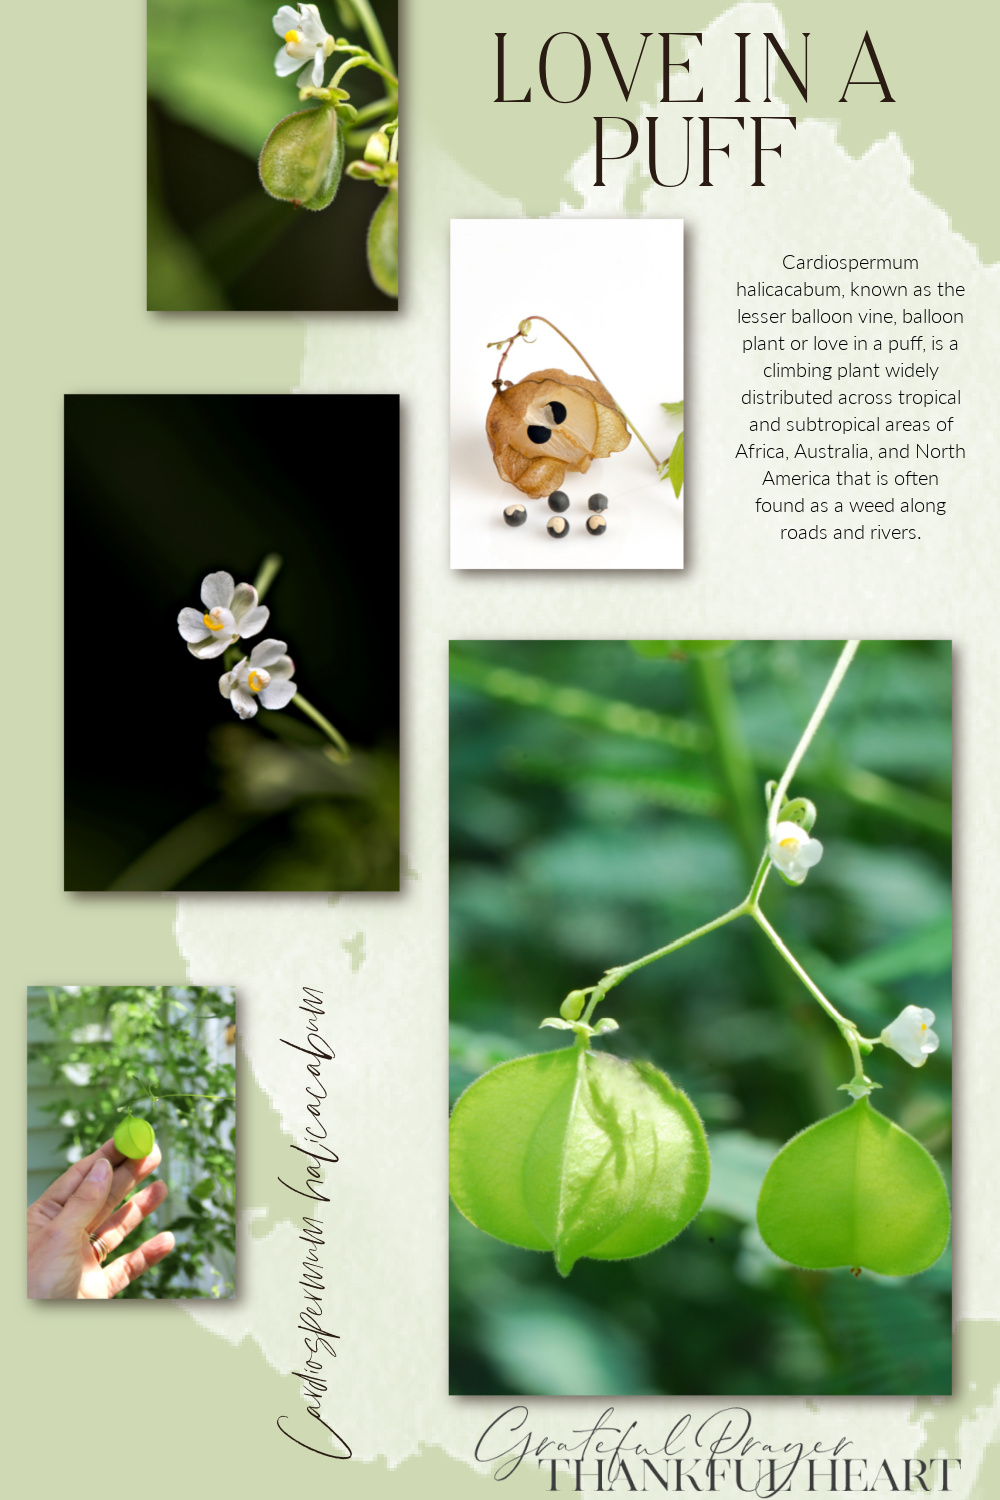 Love in a puff, a dainty vine has tiny white flowers & puffy pods resembling paper lanterns. Inside each balloon are seeds with a white heart!